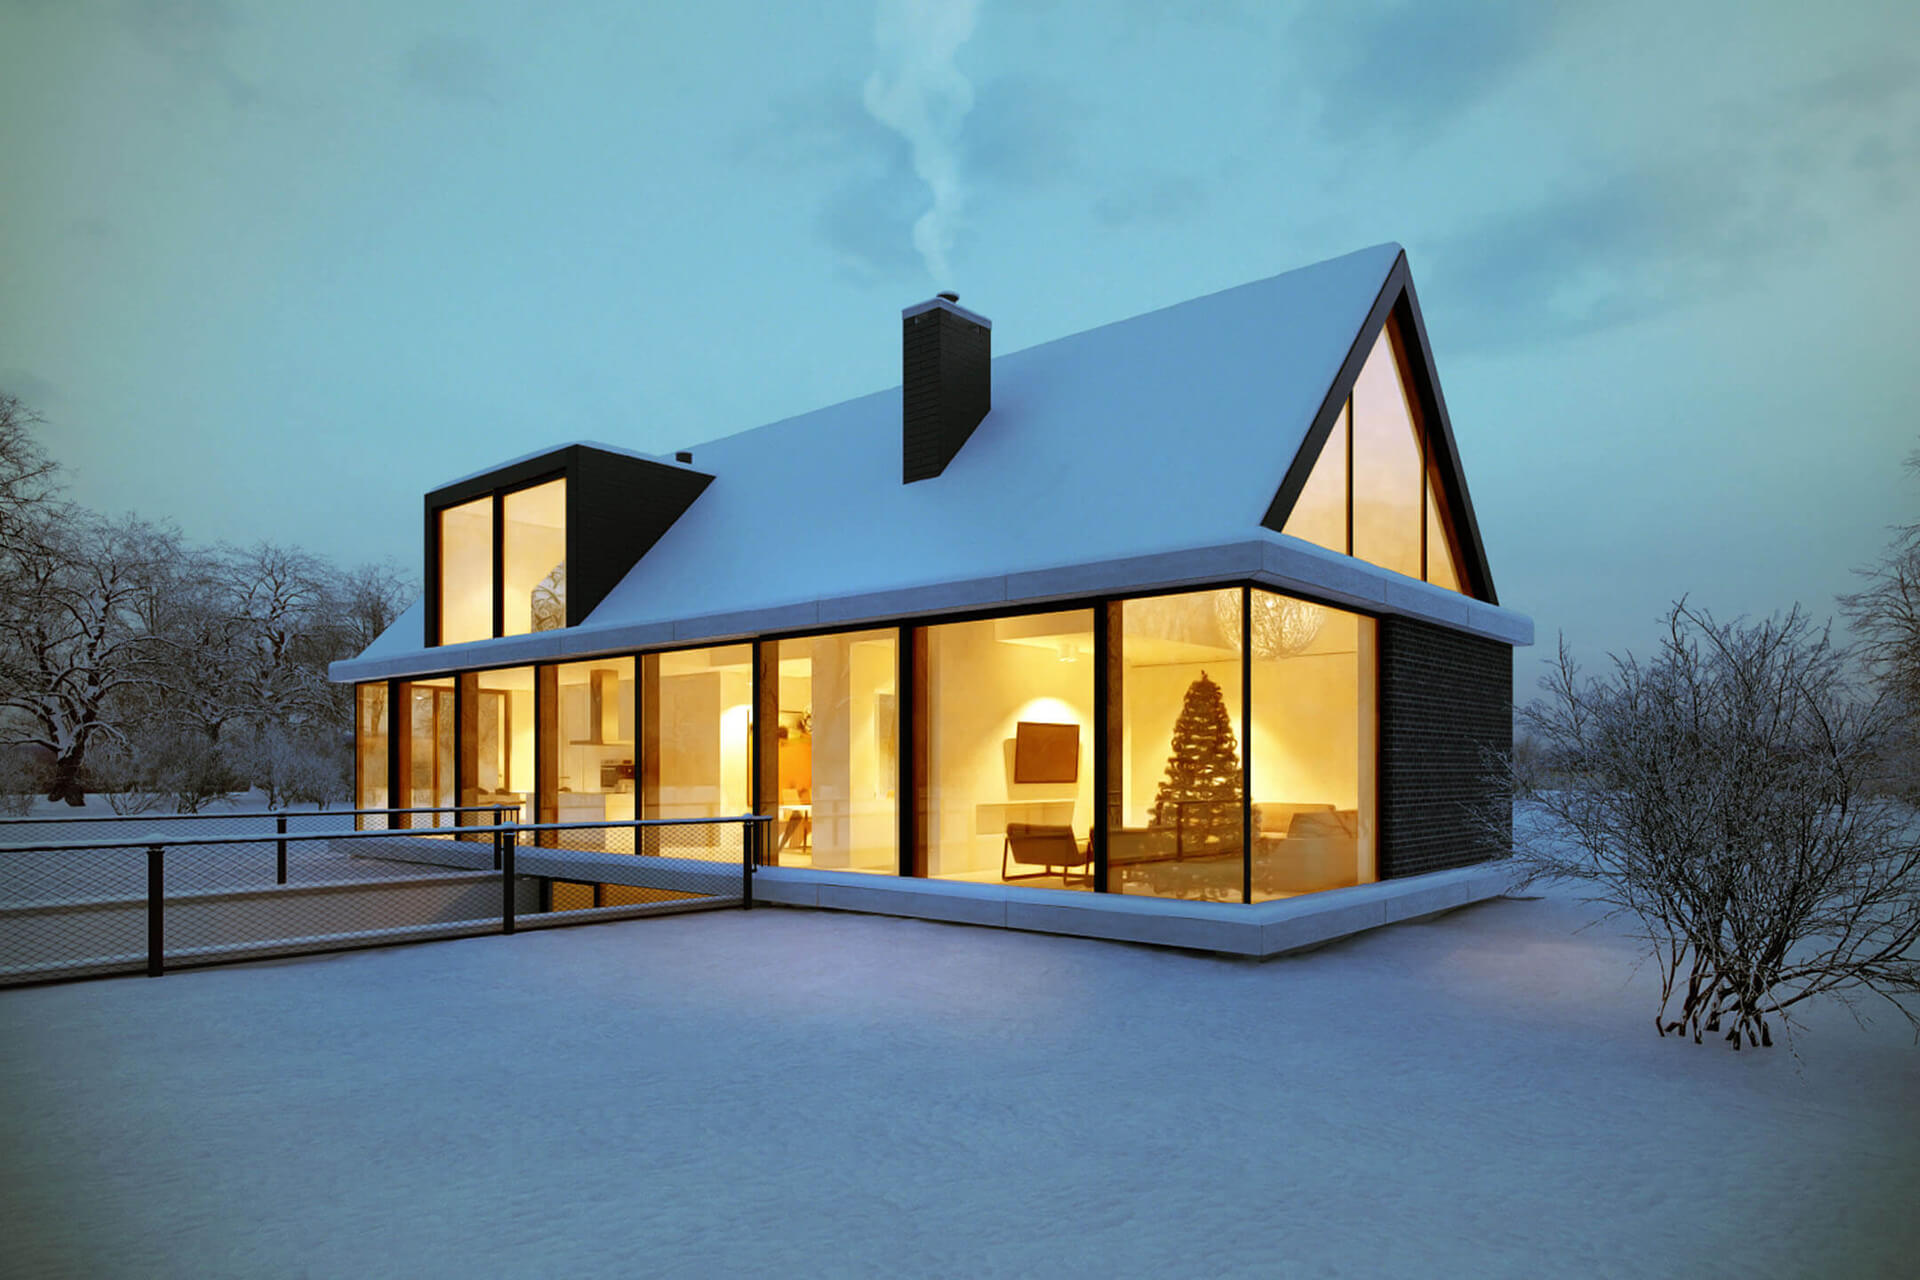 Atmospheric Exterior CGI of a Cozy House in Winter Setting